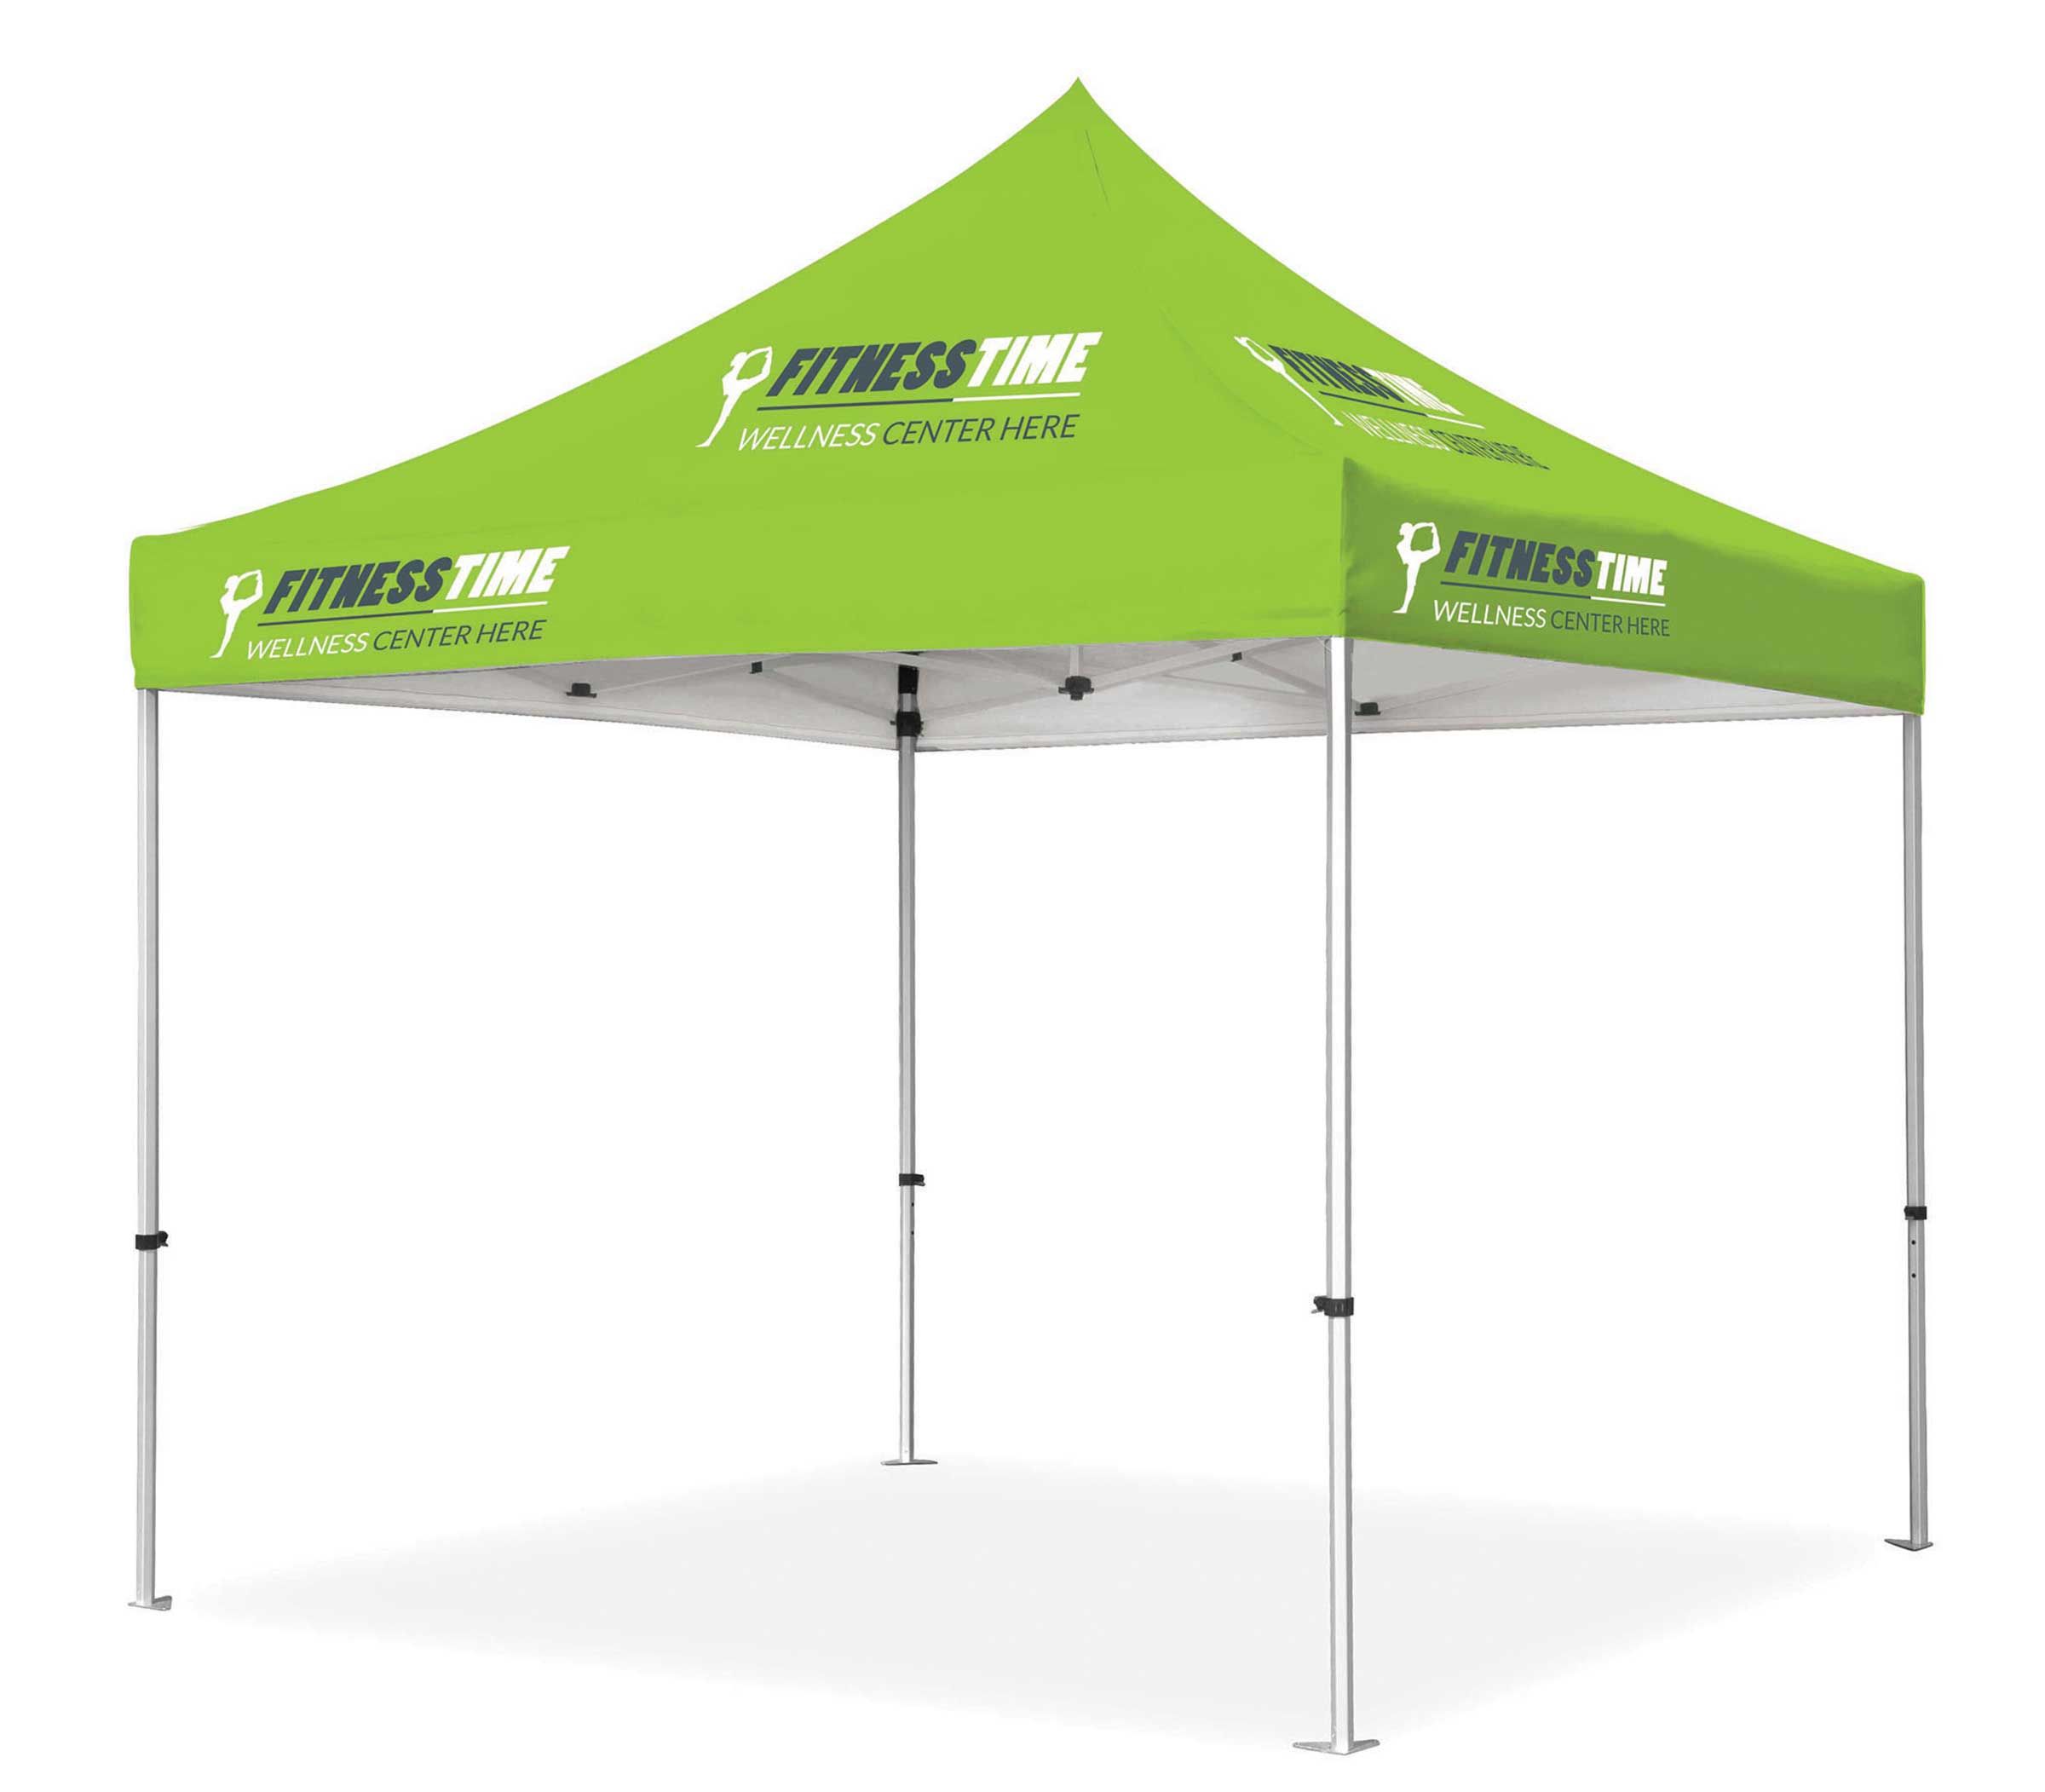 Deluxe Pop-Up Tent Kit With White Steel Frame (30mm post, 1.2mm gauge)  Dye Sublimation on Canopy - 10x10ft